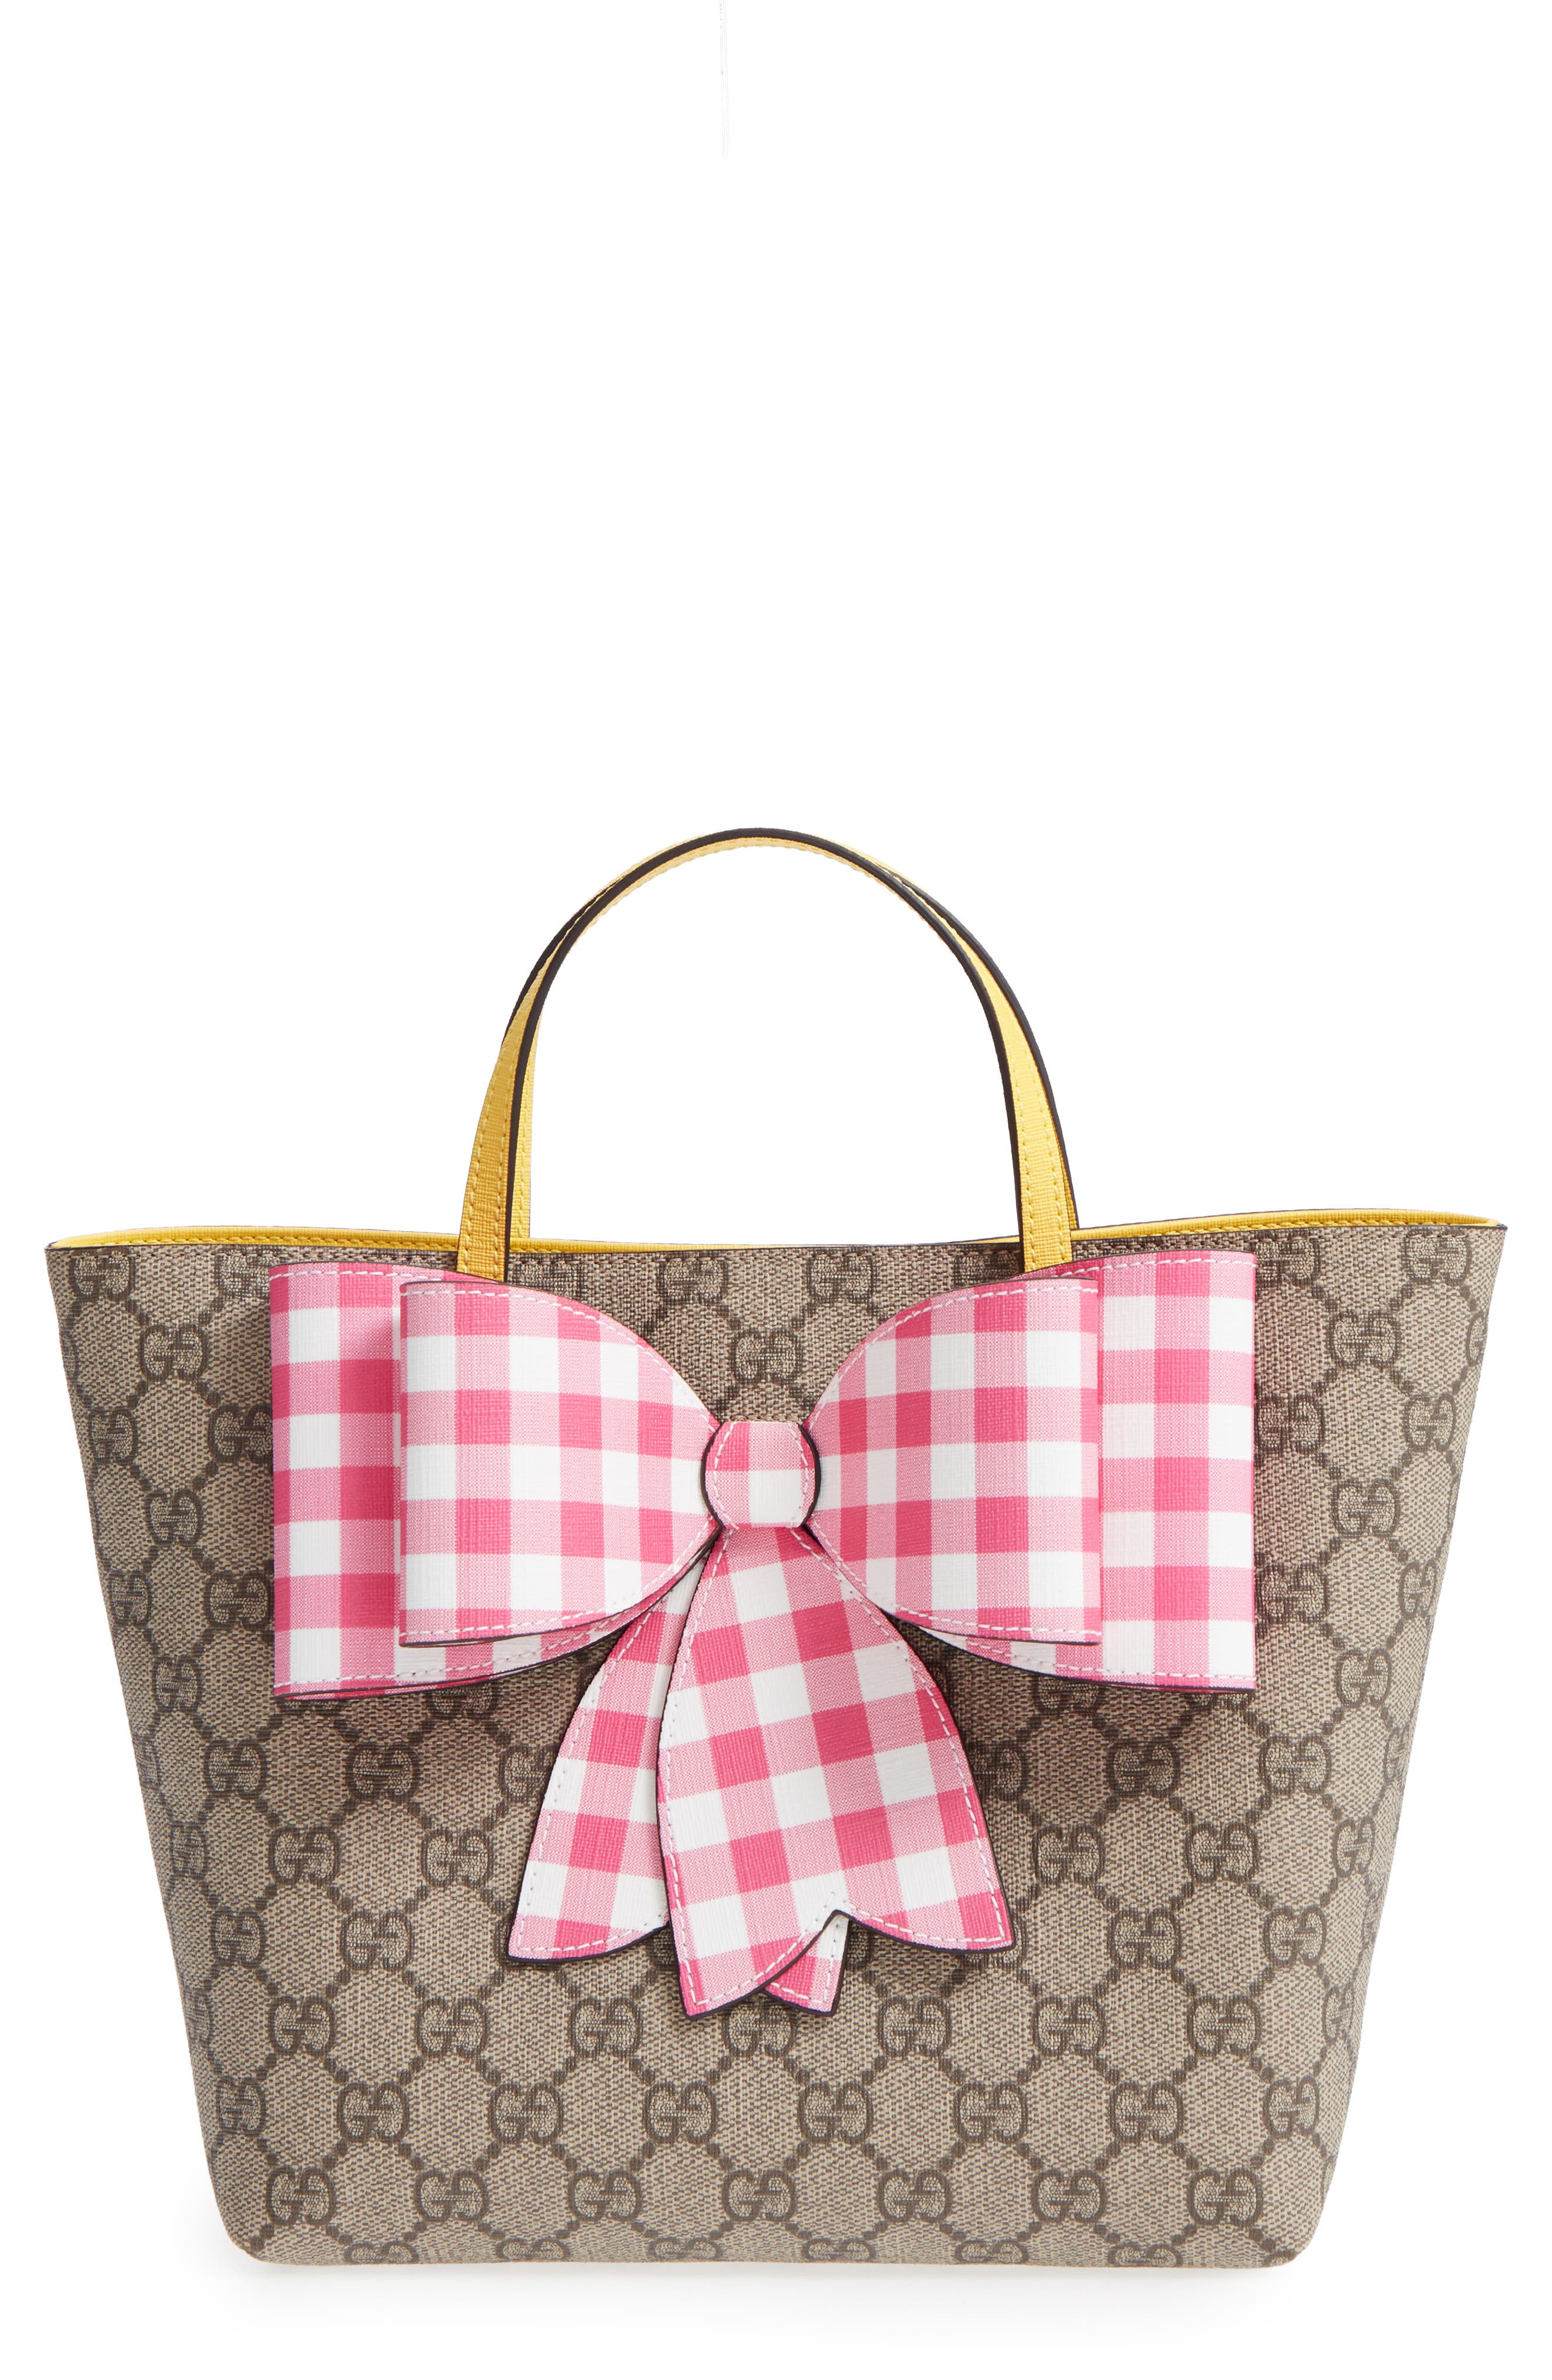 gucci bag with bow